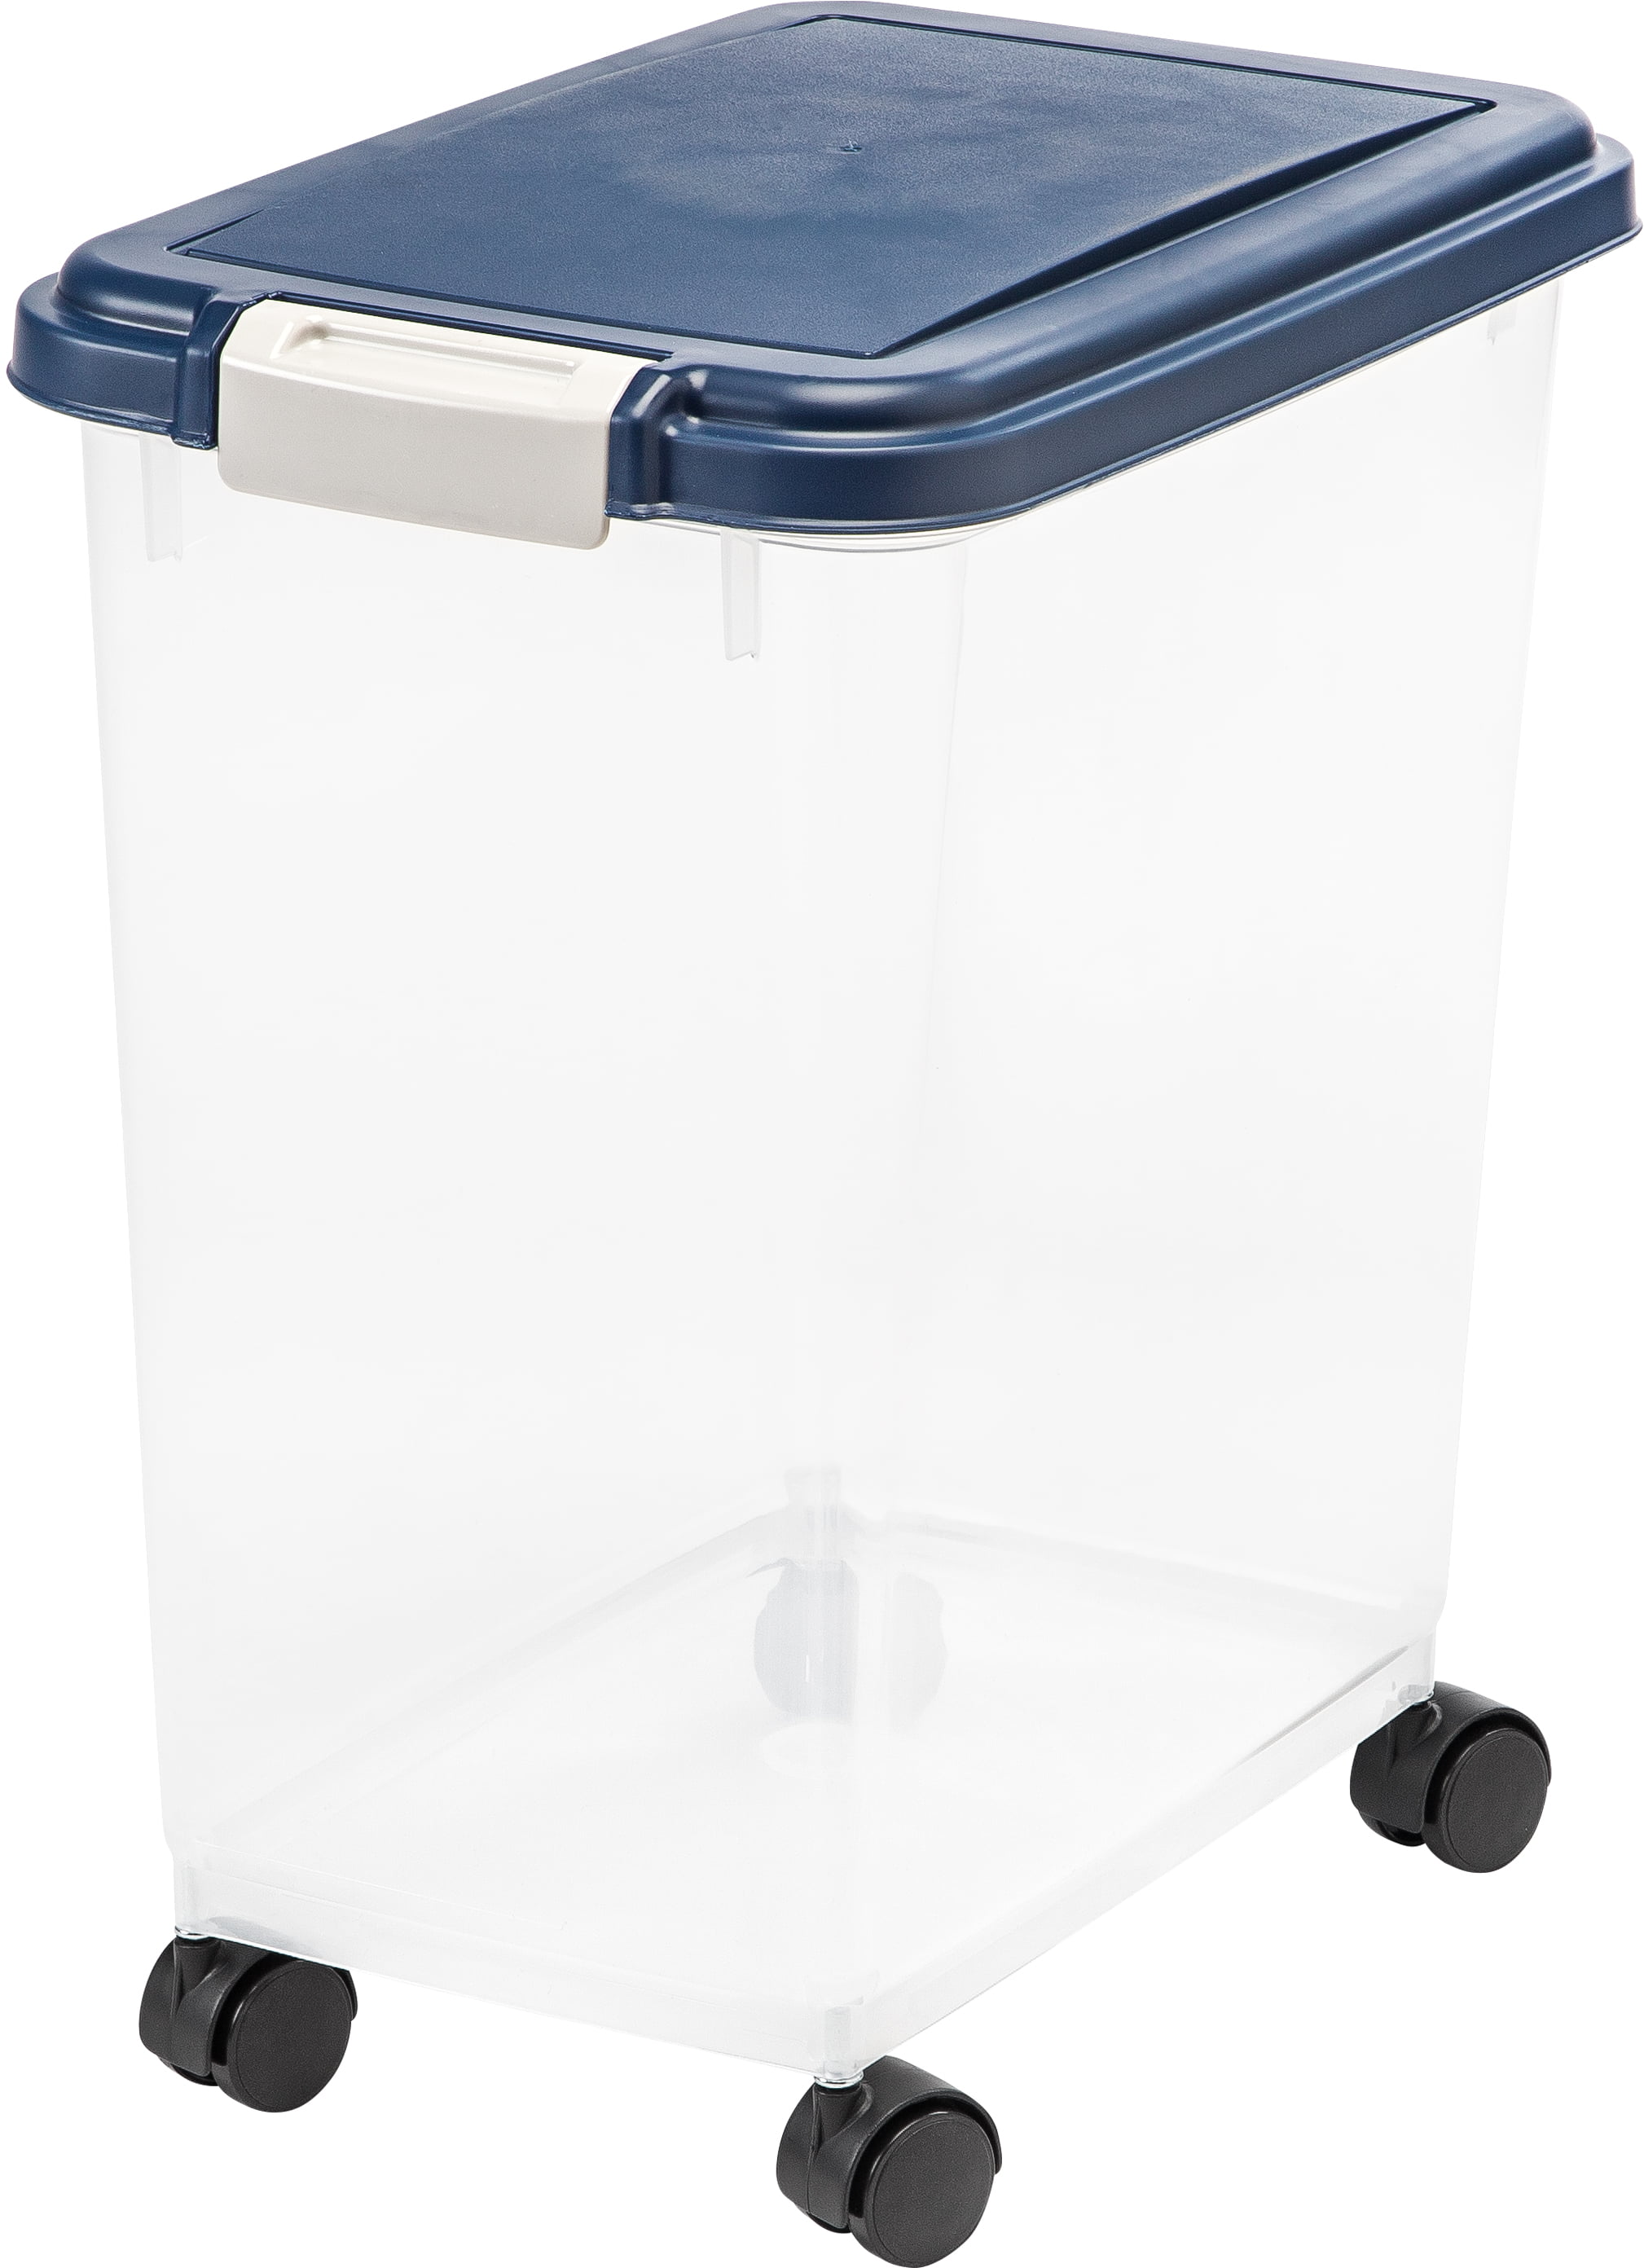 Iris 45 lb. Pet Food Container Clear & White, 13-5/8 x 18-1/2 x 22-1/2 H | The Container Store